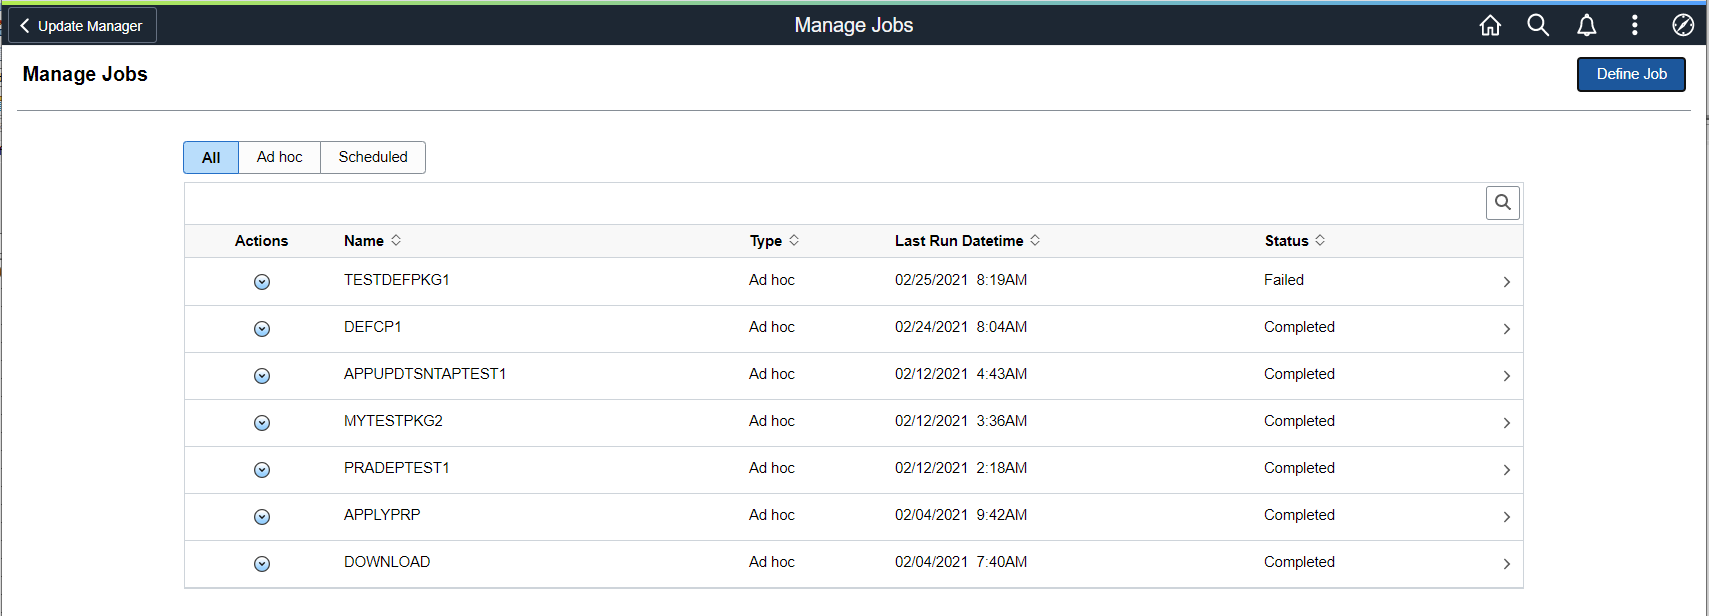 Manage Jobs page